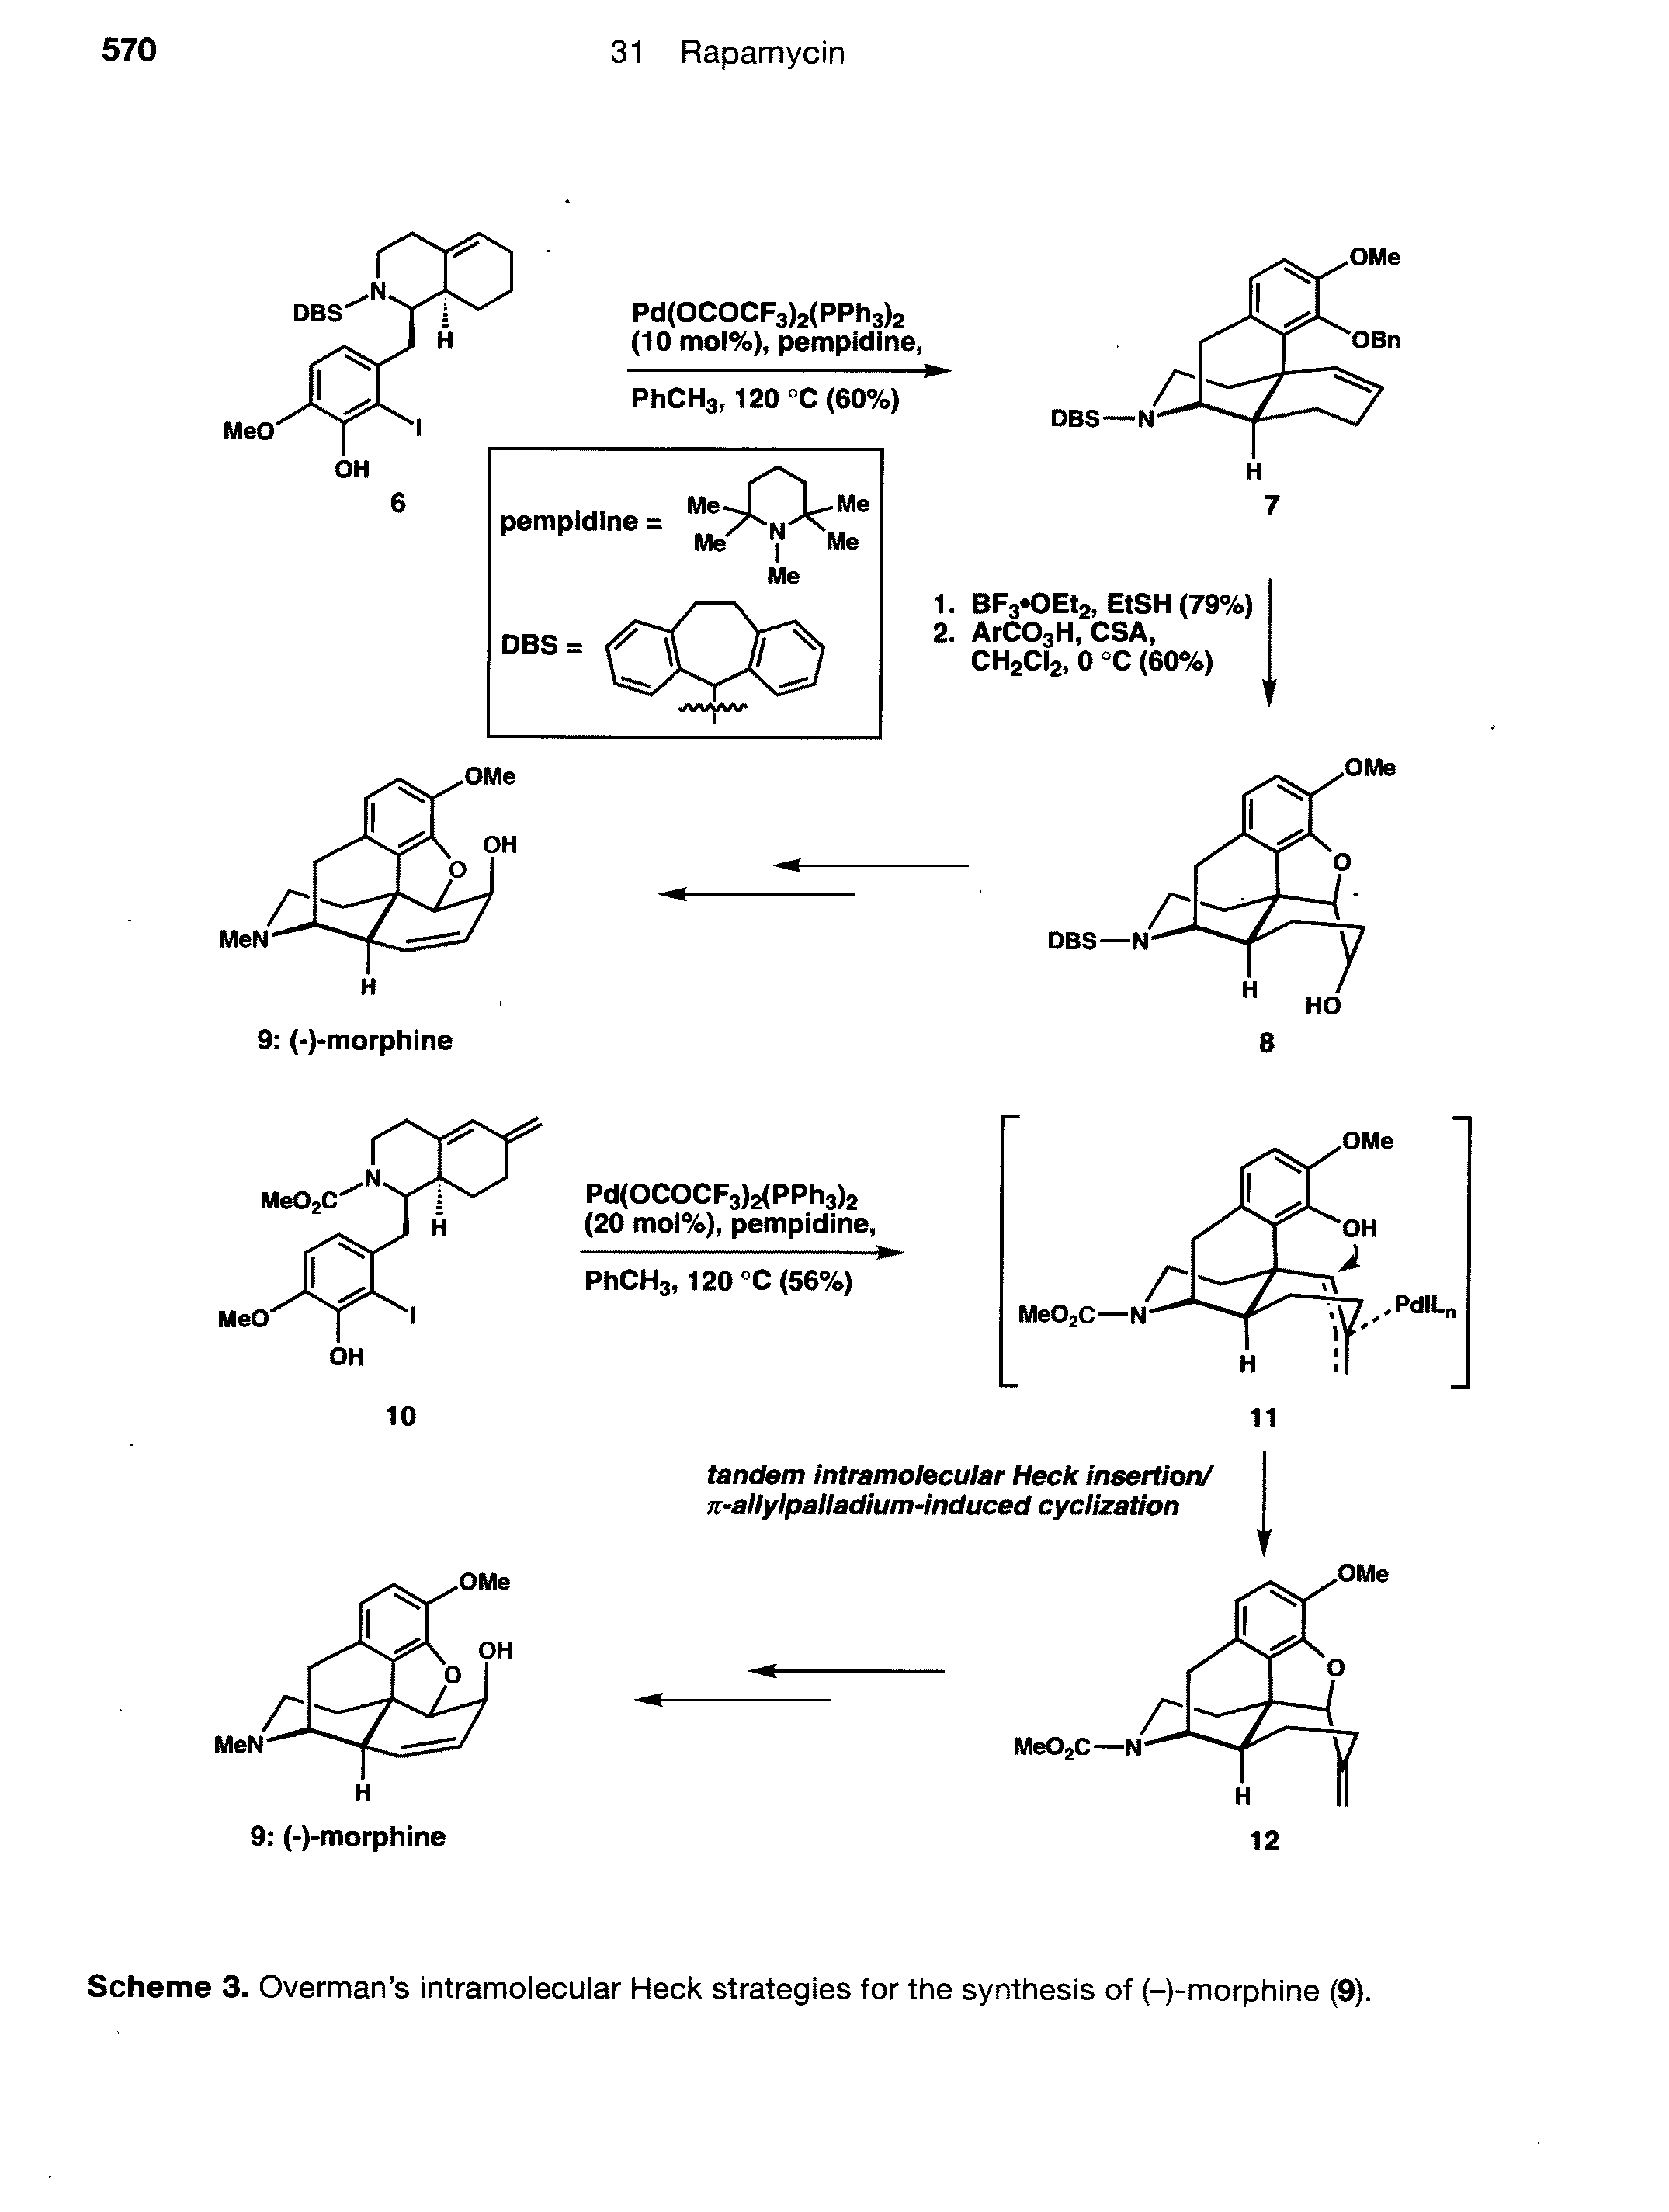 Scheme 3. Overman s intramolecular Heck strategies for the synthesis of (-)-morphine (9).